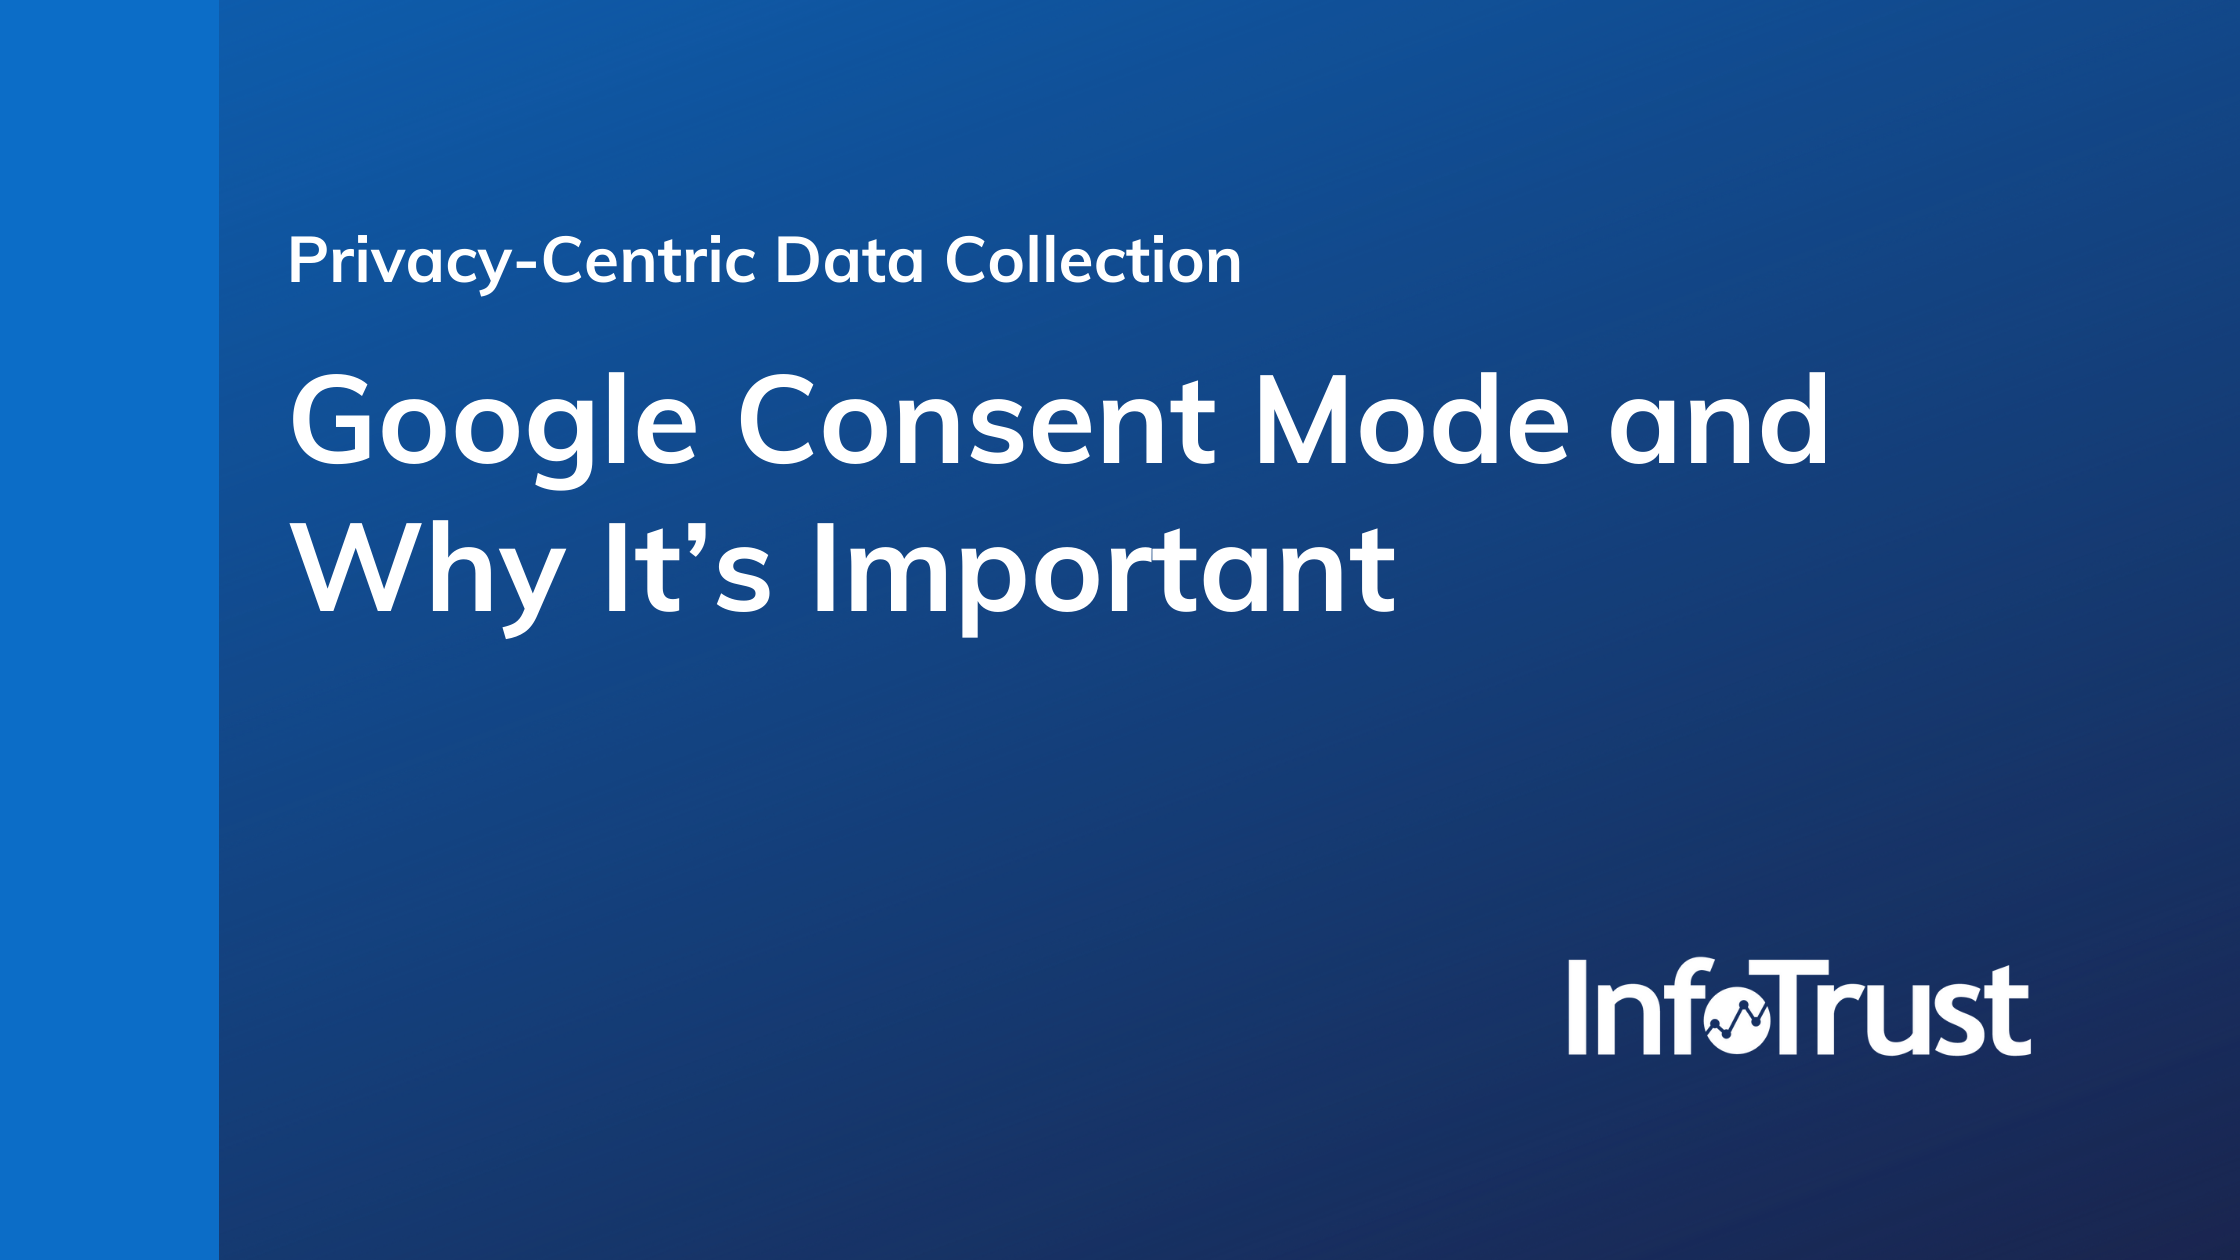 Privacy-Centric Data Collection: Google Consent Mode and Why It’s Important